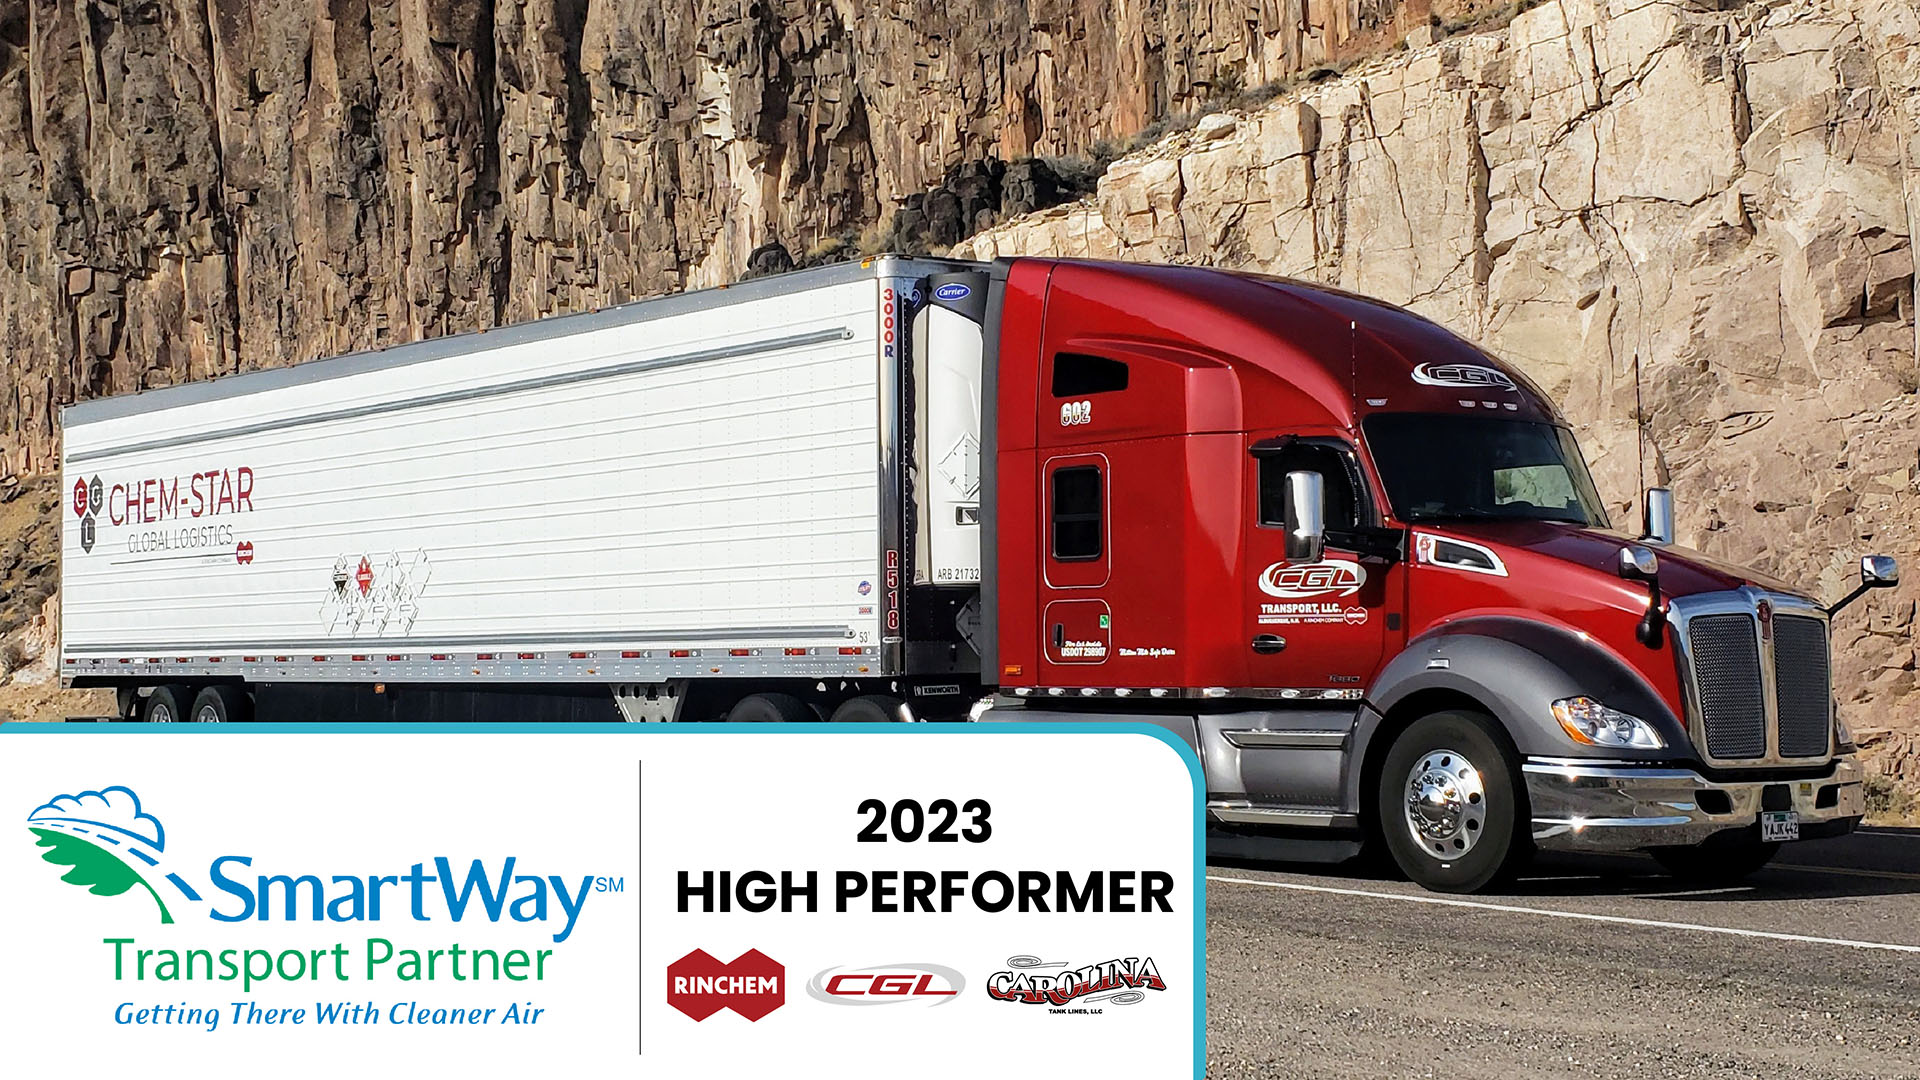 Featured image for “Rinchem Achieves SmartWay High Performer Status for 2023 ”